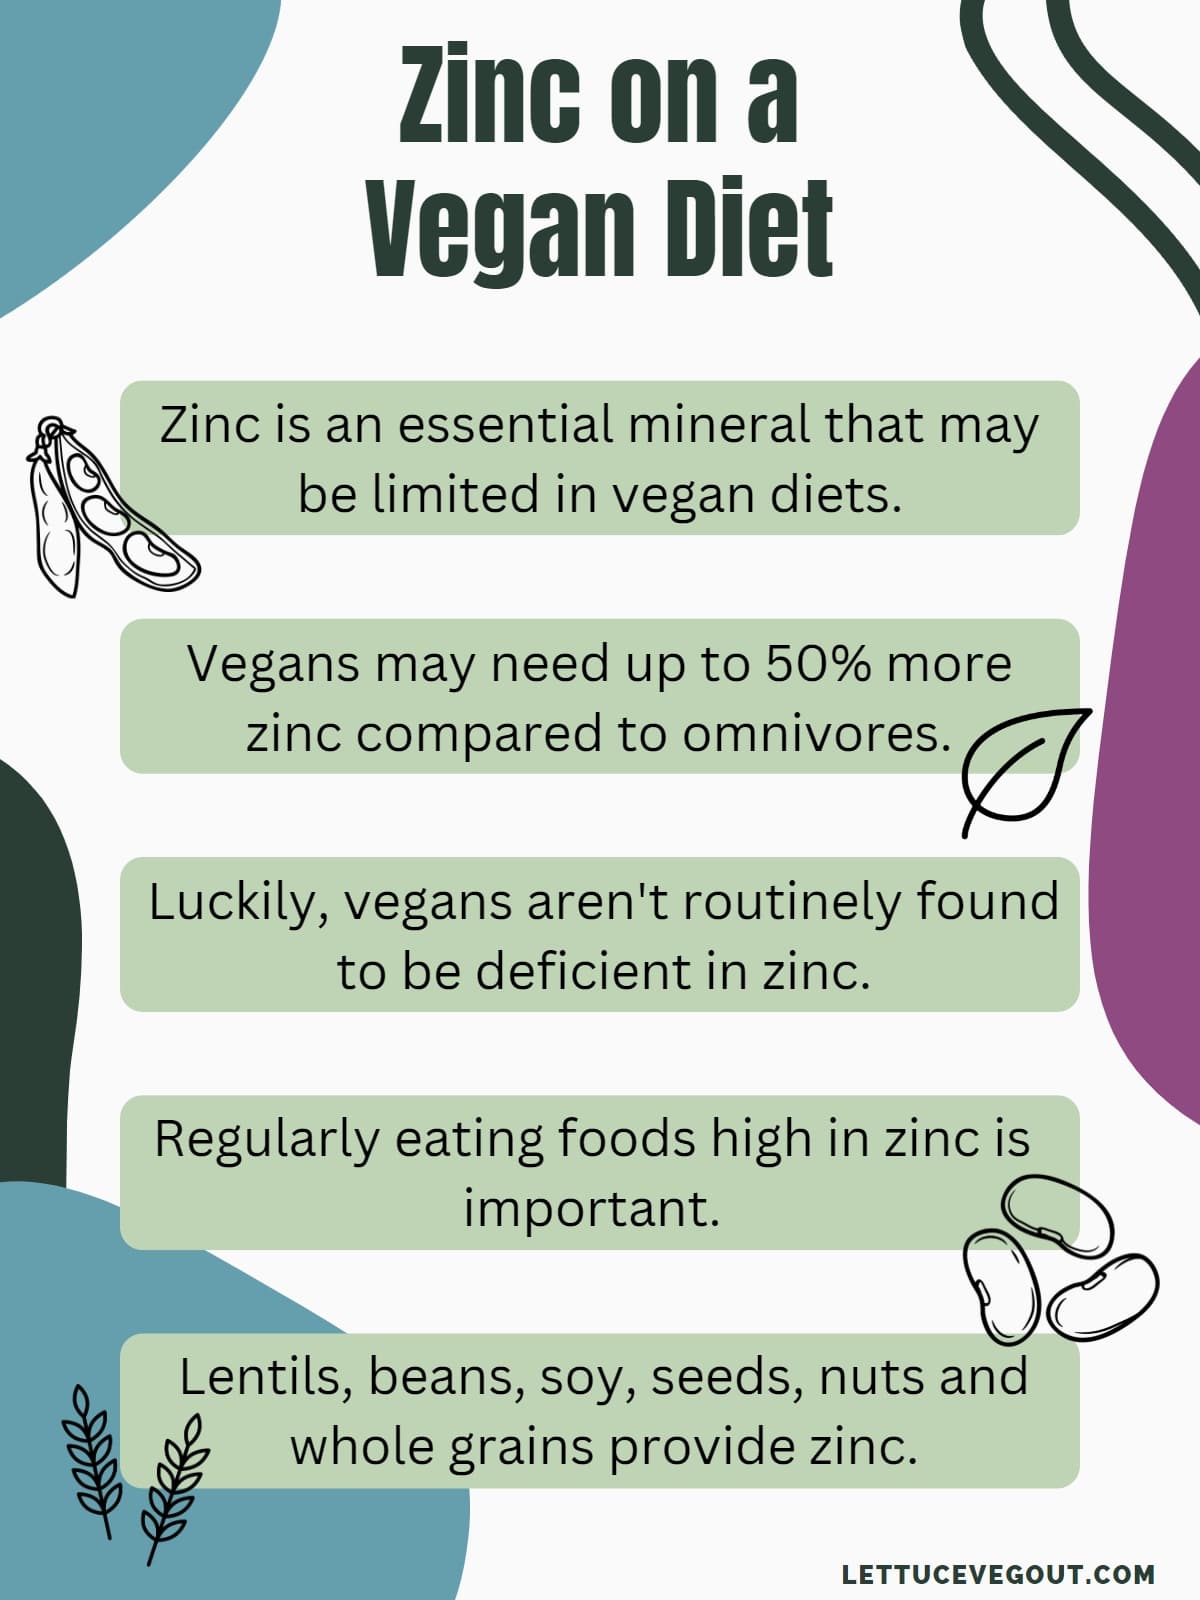 List of facts about zinc on a vegan diet.